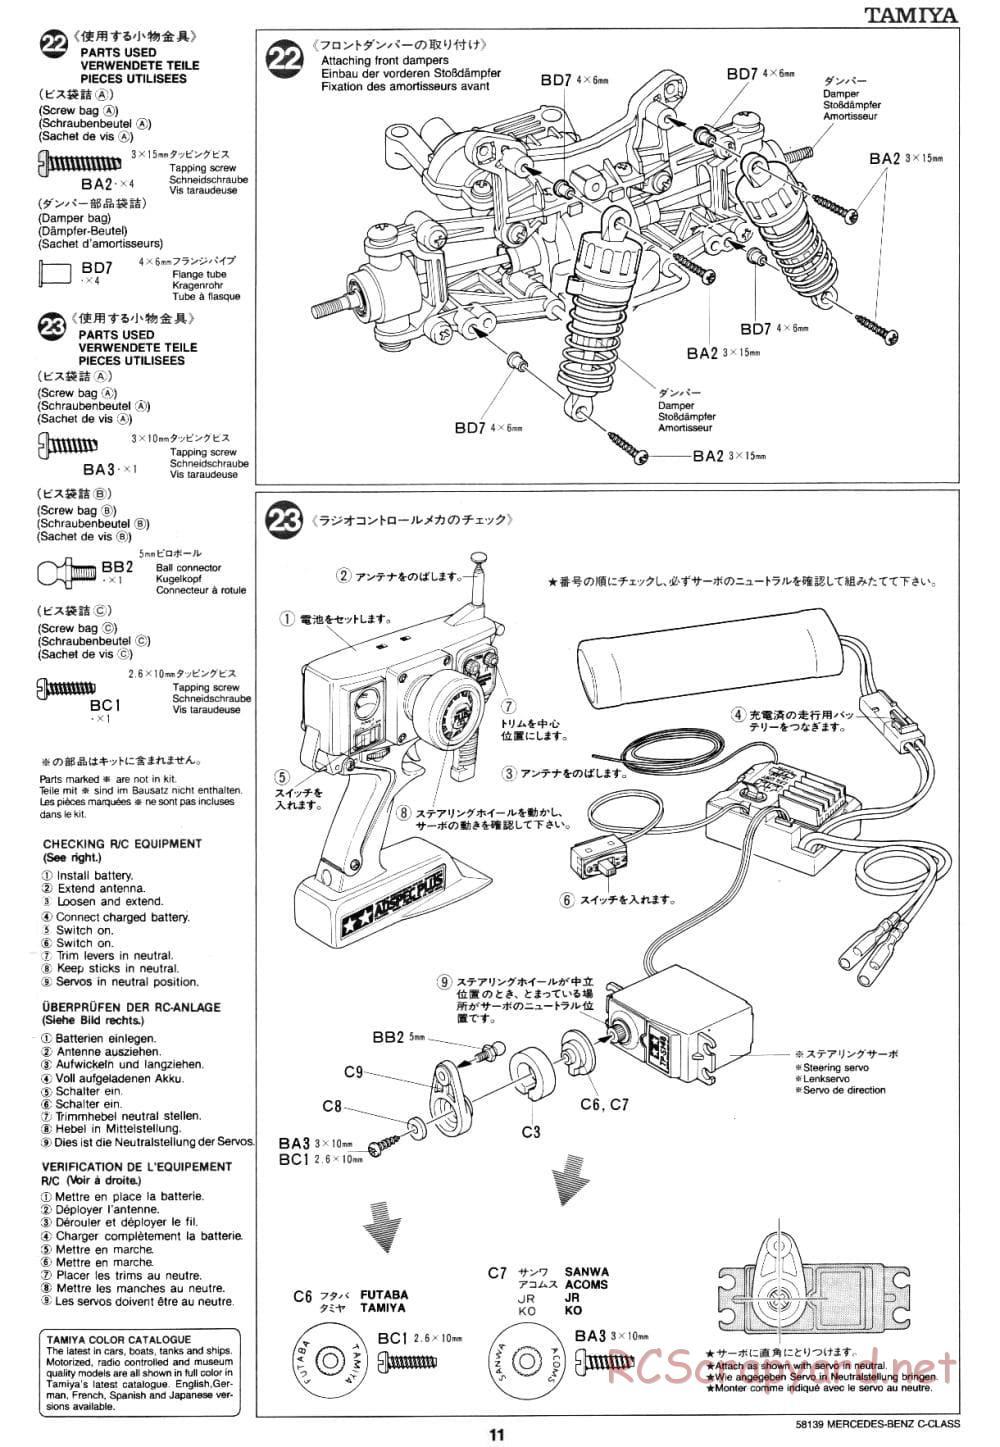 Tamiya - AMG Mercedes-Benz C-Class DTM D2 - TA-02 Chassis - Manual - Page 11